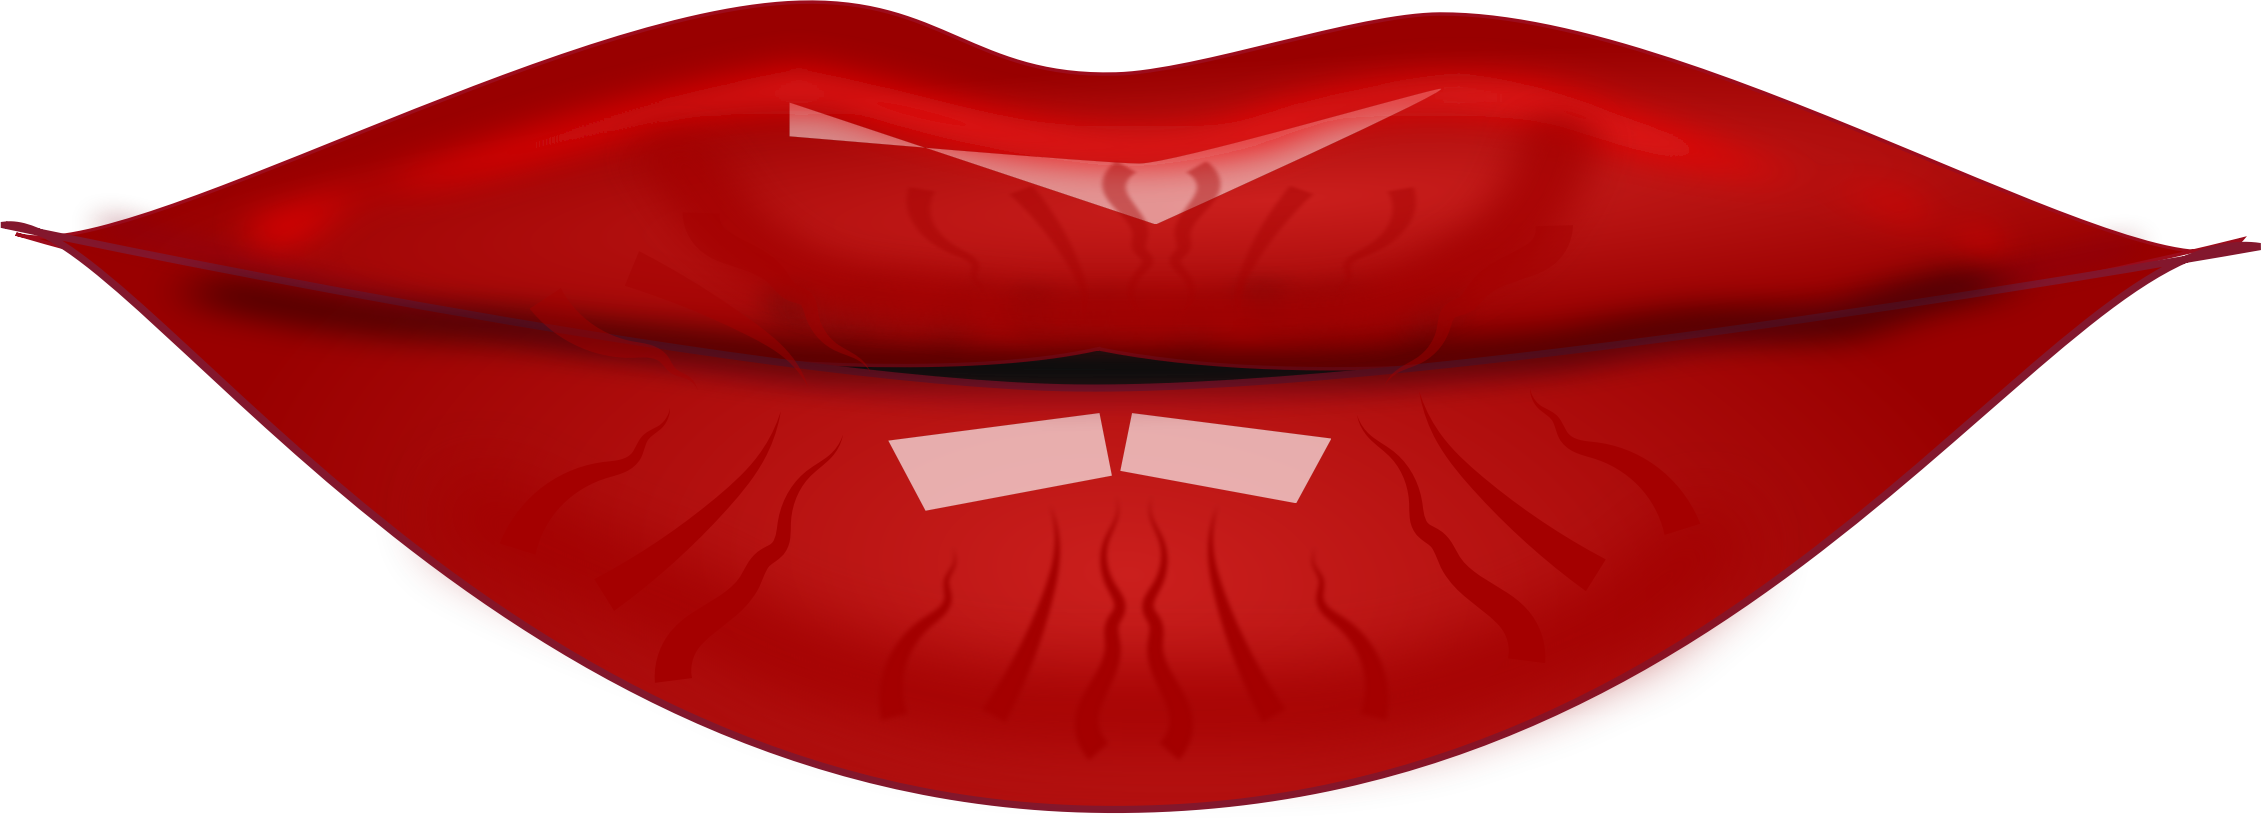 Red Lips Free PNG